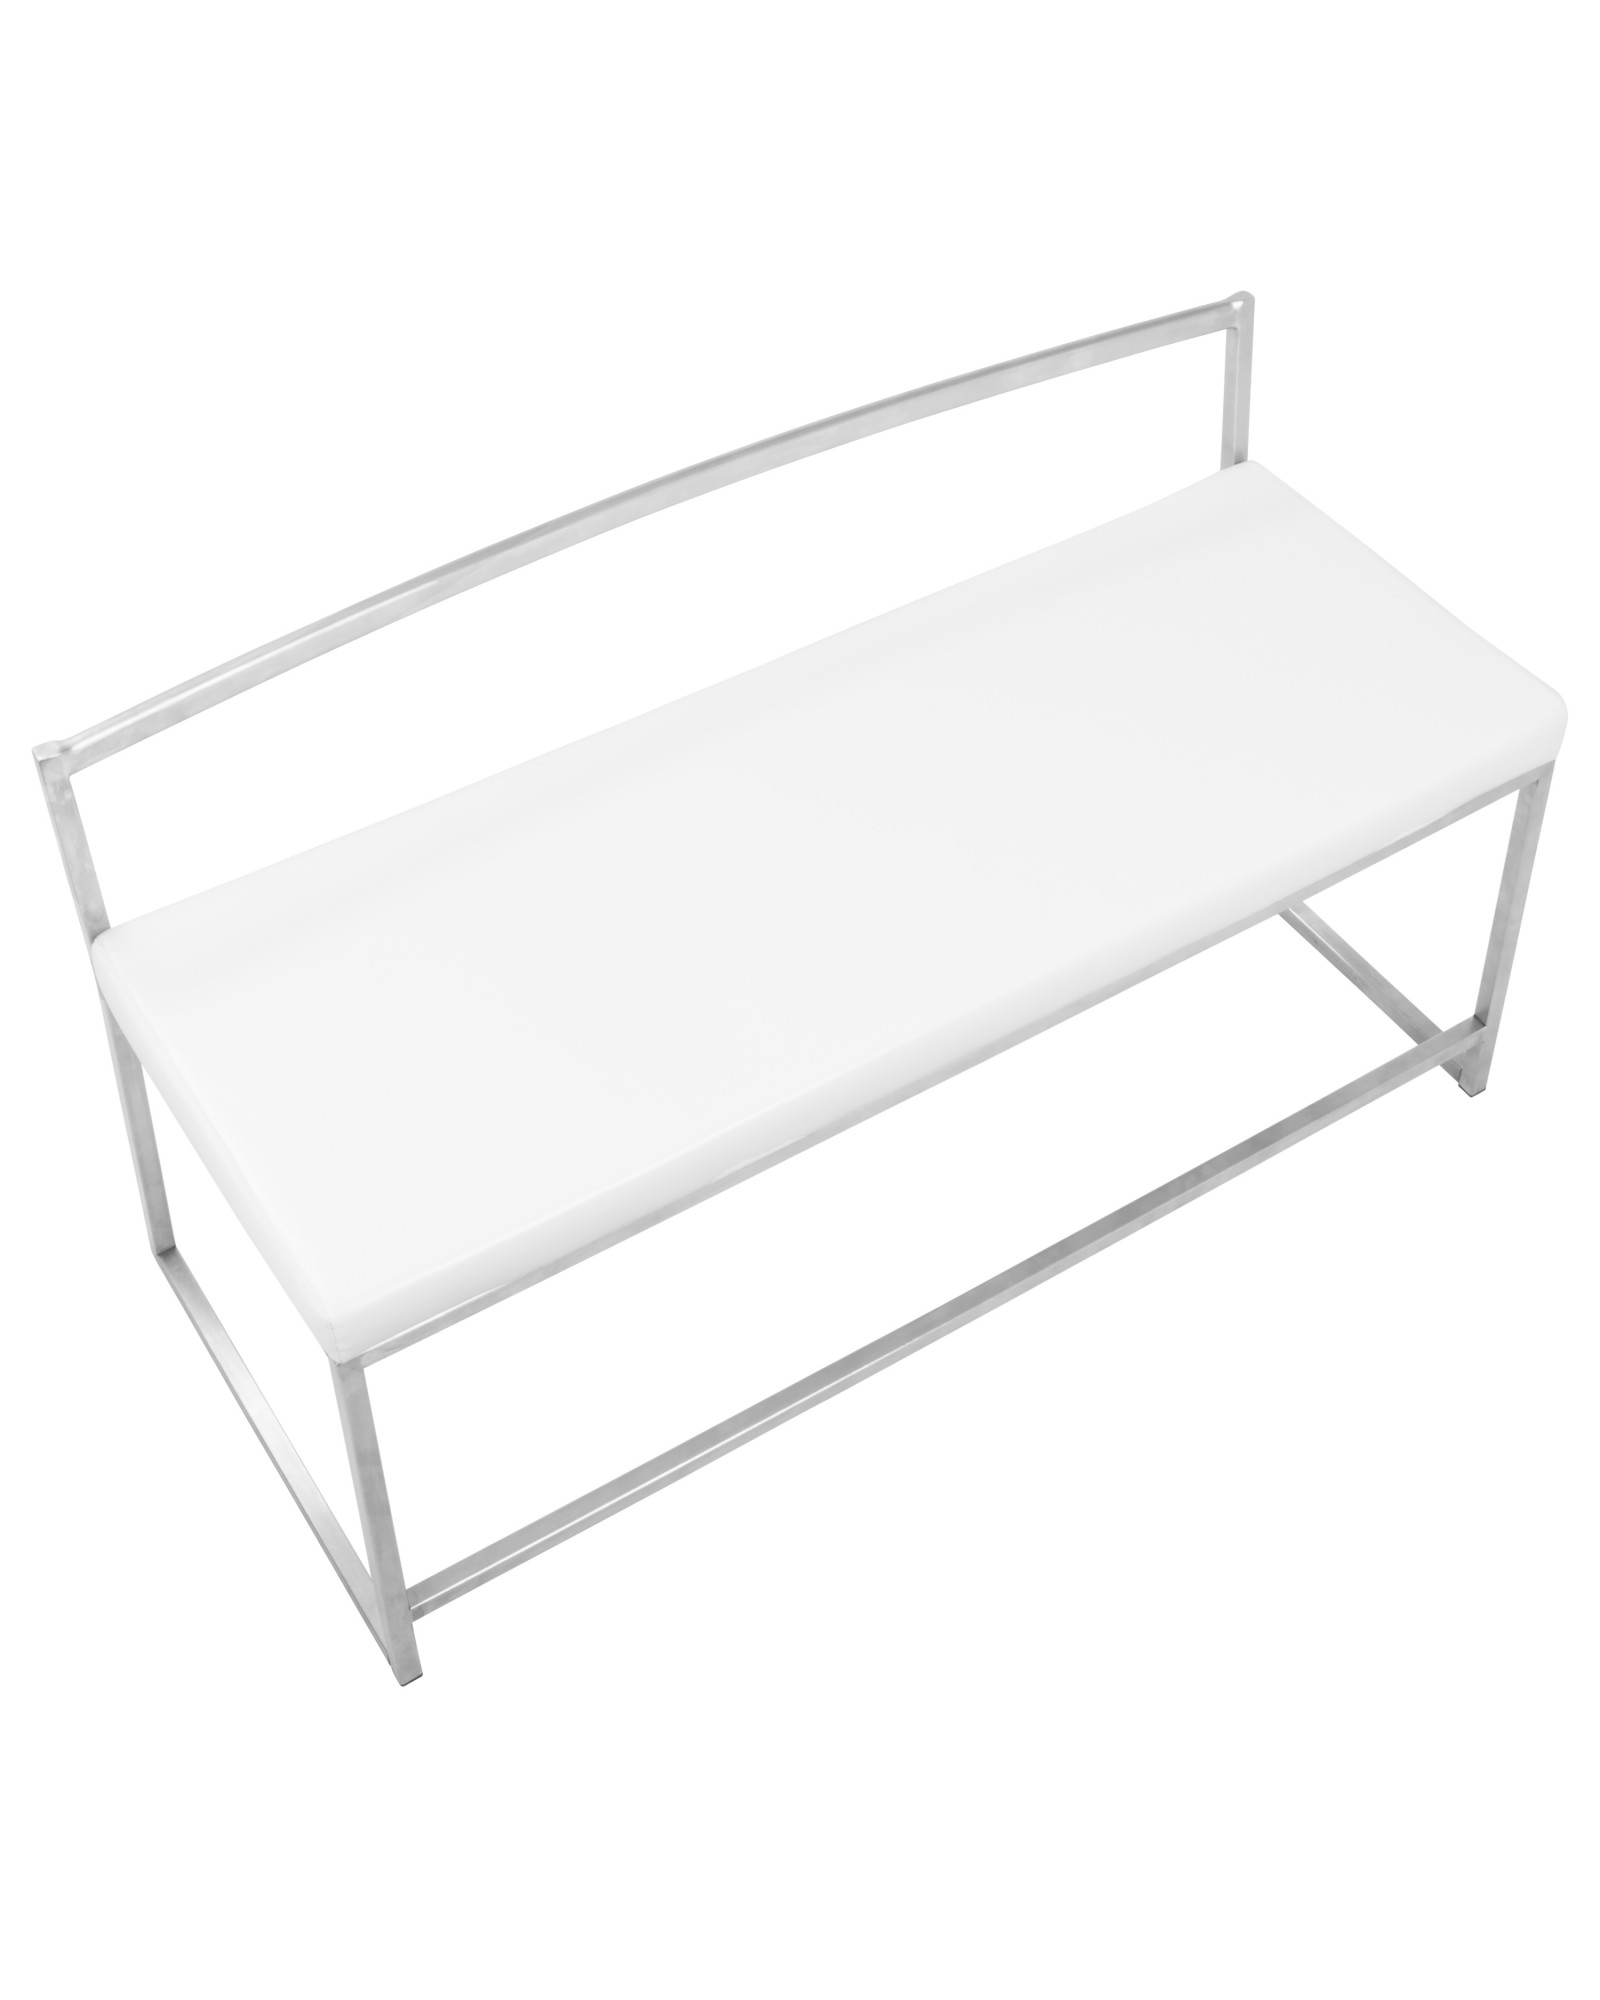 Fuji Contemporary Dining / Entryway Bench in White Faux Leather